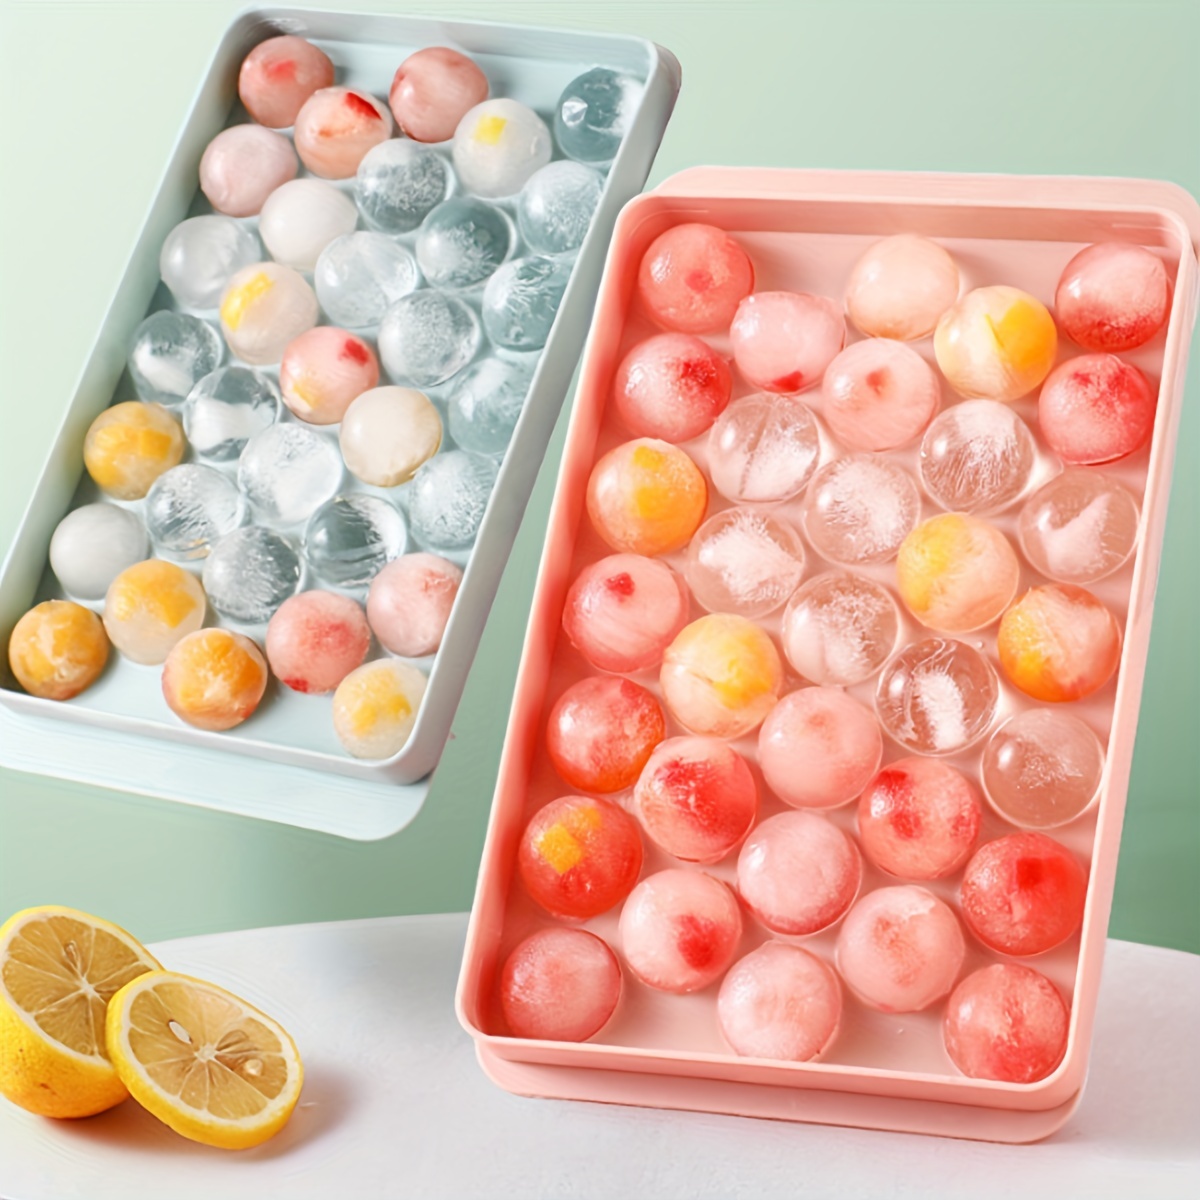 Silicone Ice Cube Tray with Lid and Bin for Freezer, 56 Nugget Ice Tray  (Pink)